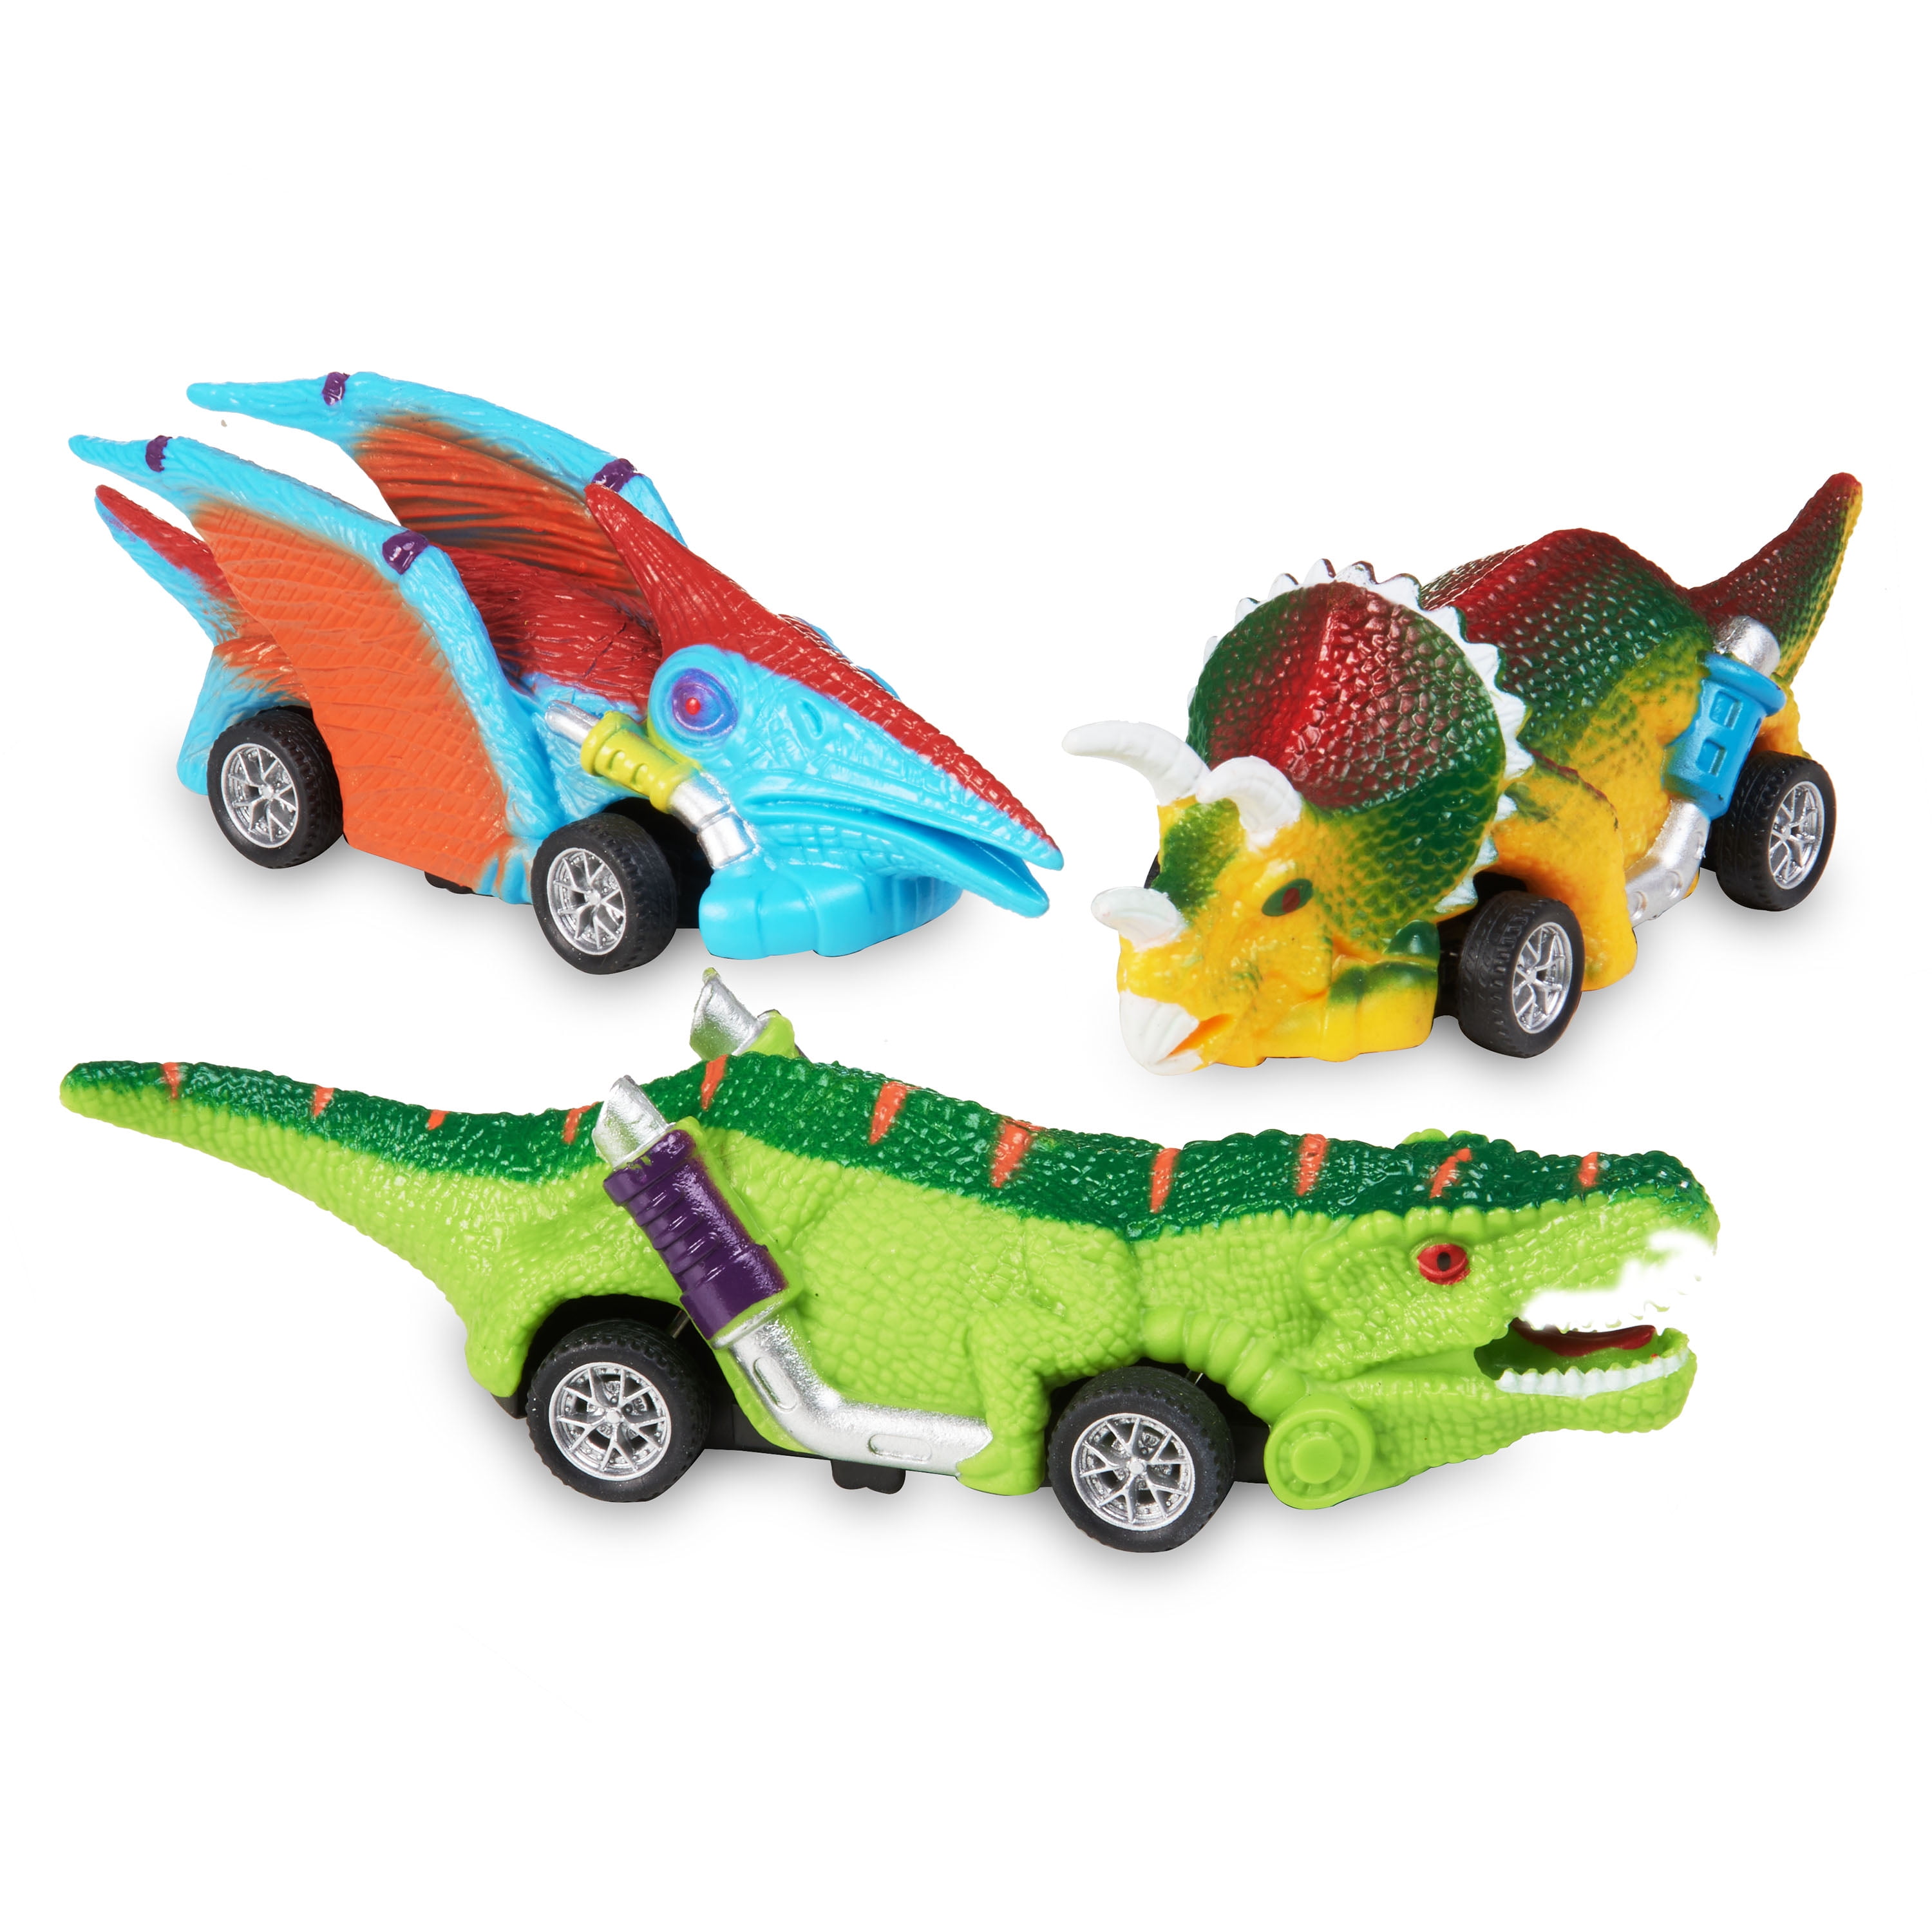 Adventure Force Dinosaur 8 Pc Ages 3 and up for sale online 